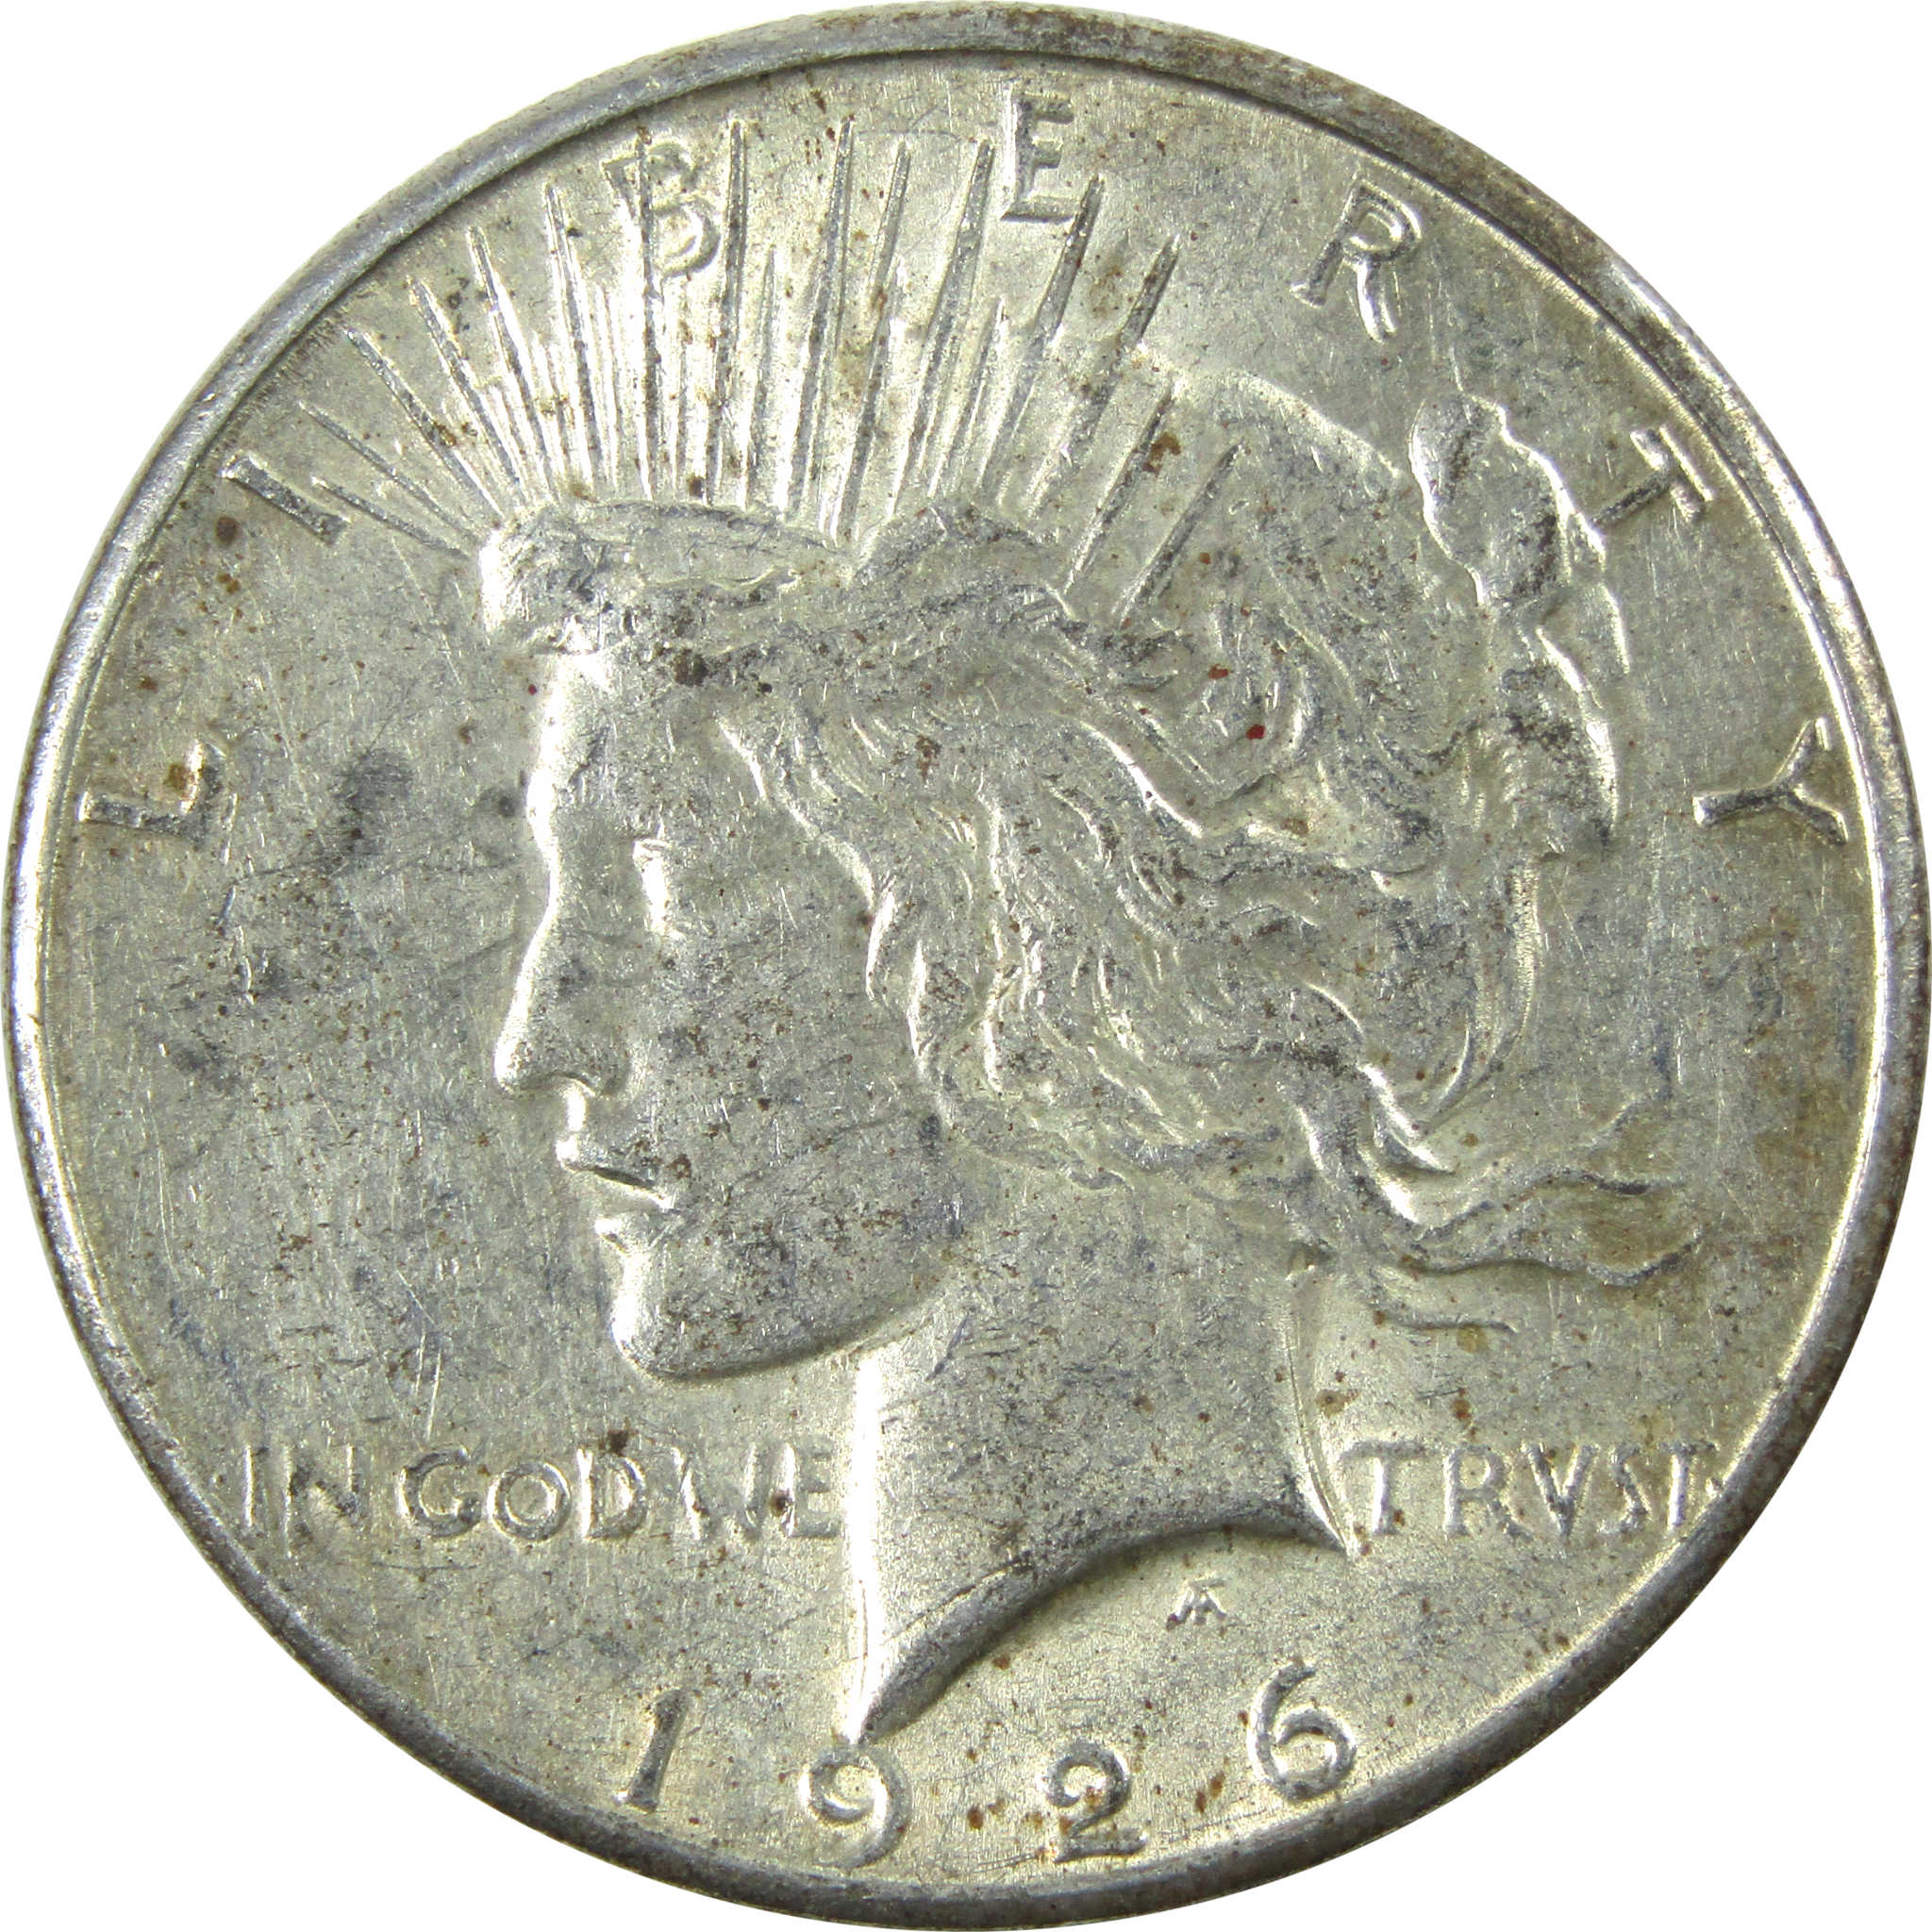 1926 S Peace Dollar XF EF Extremely Fine Silver $1 Coin SKU:I13753